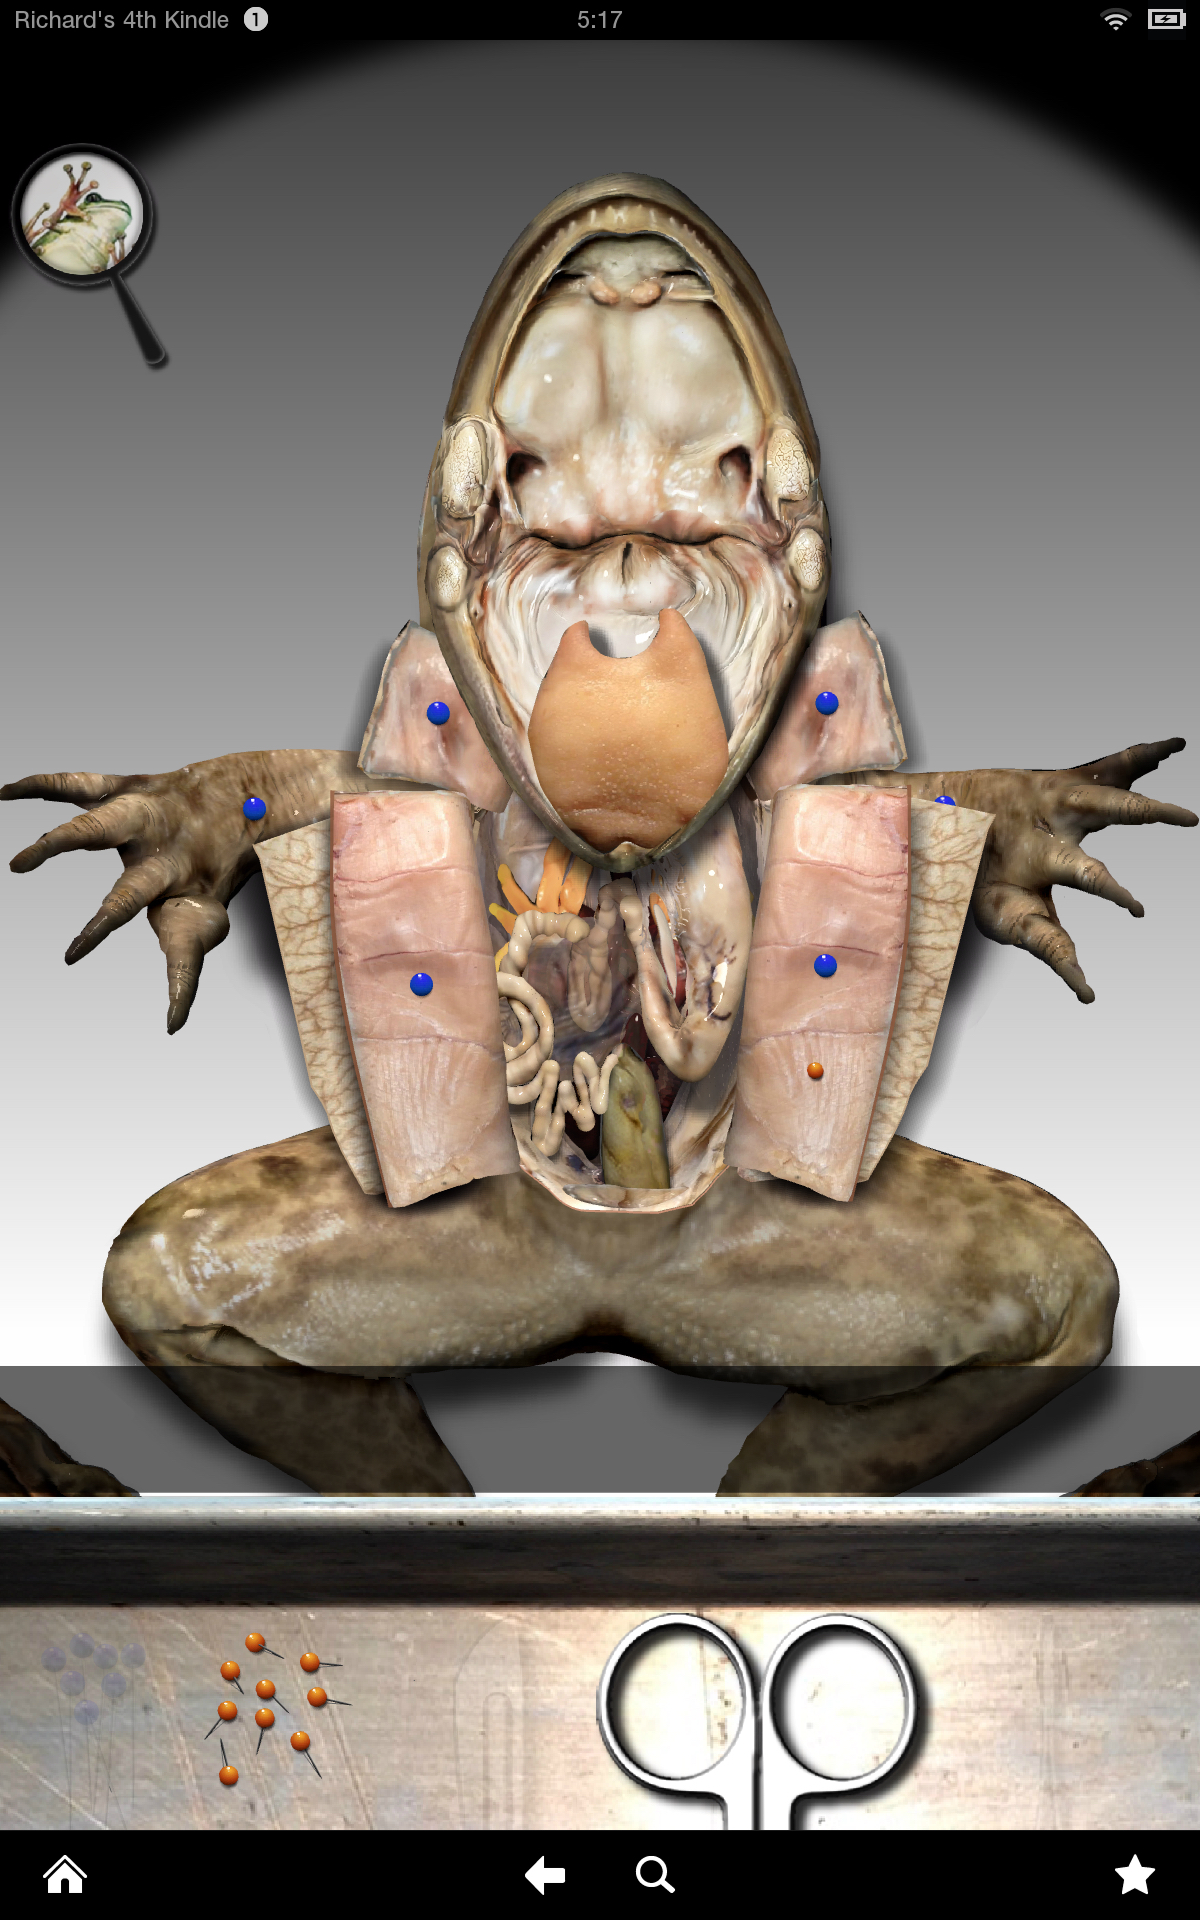 free virtual frog dissection game